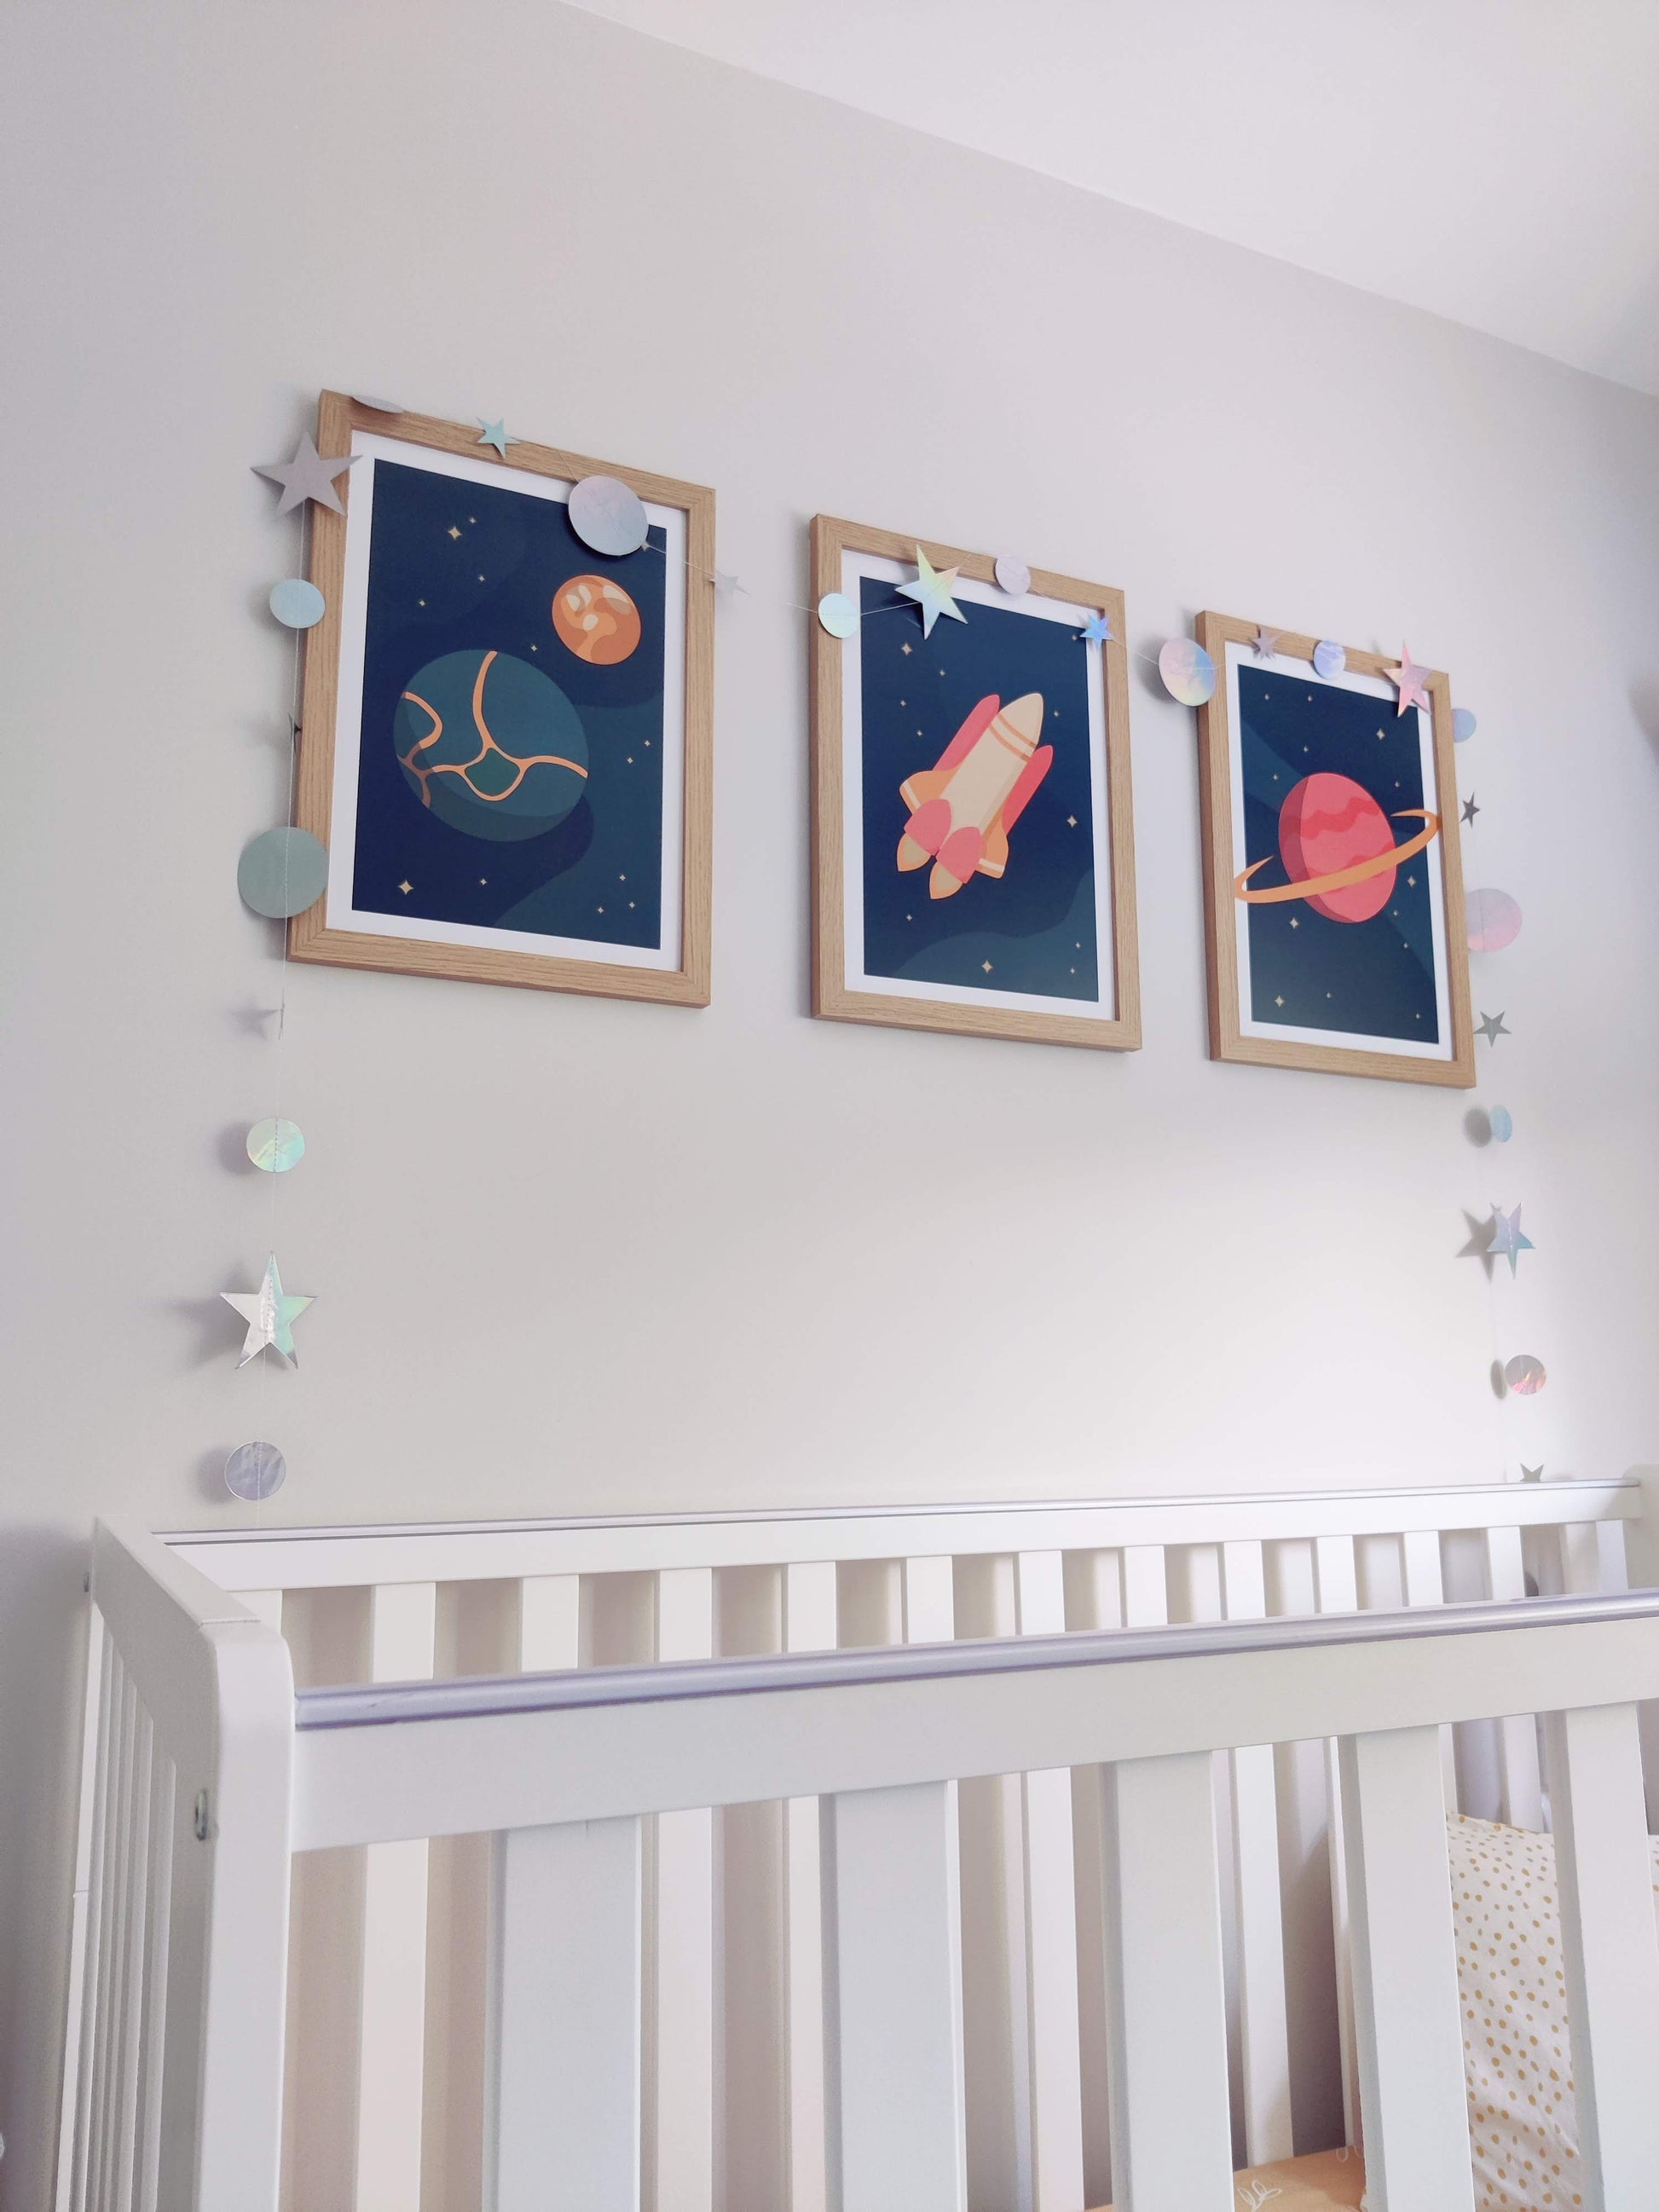 Low angle shot of space prints on the wall in a nursery with a crib in the foreground